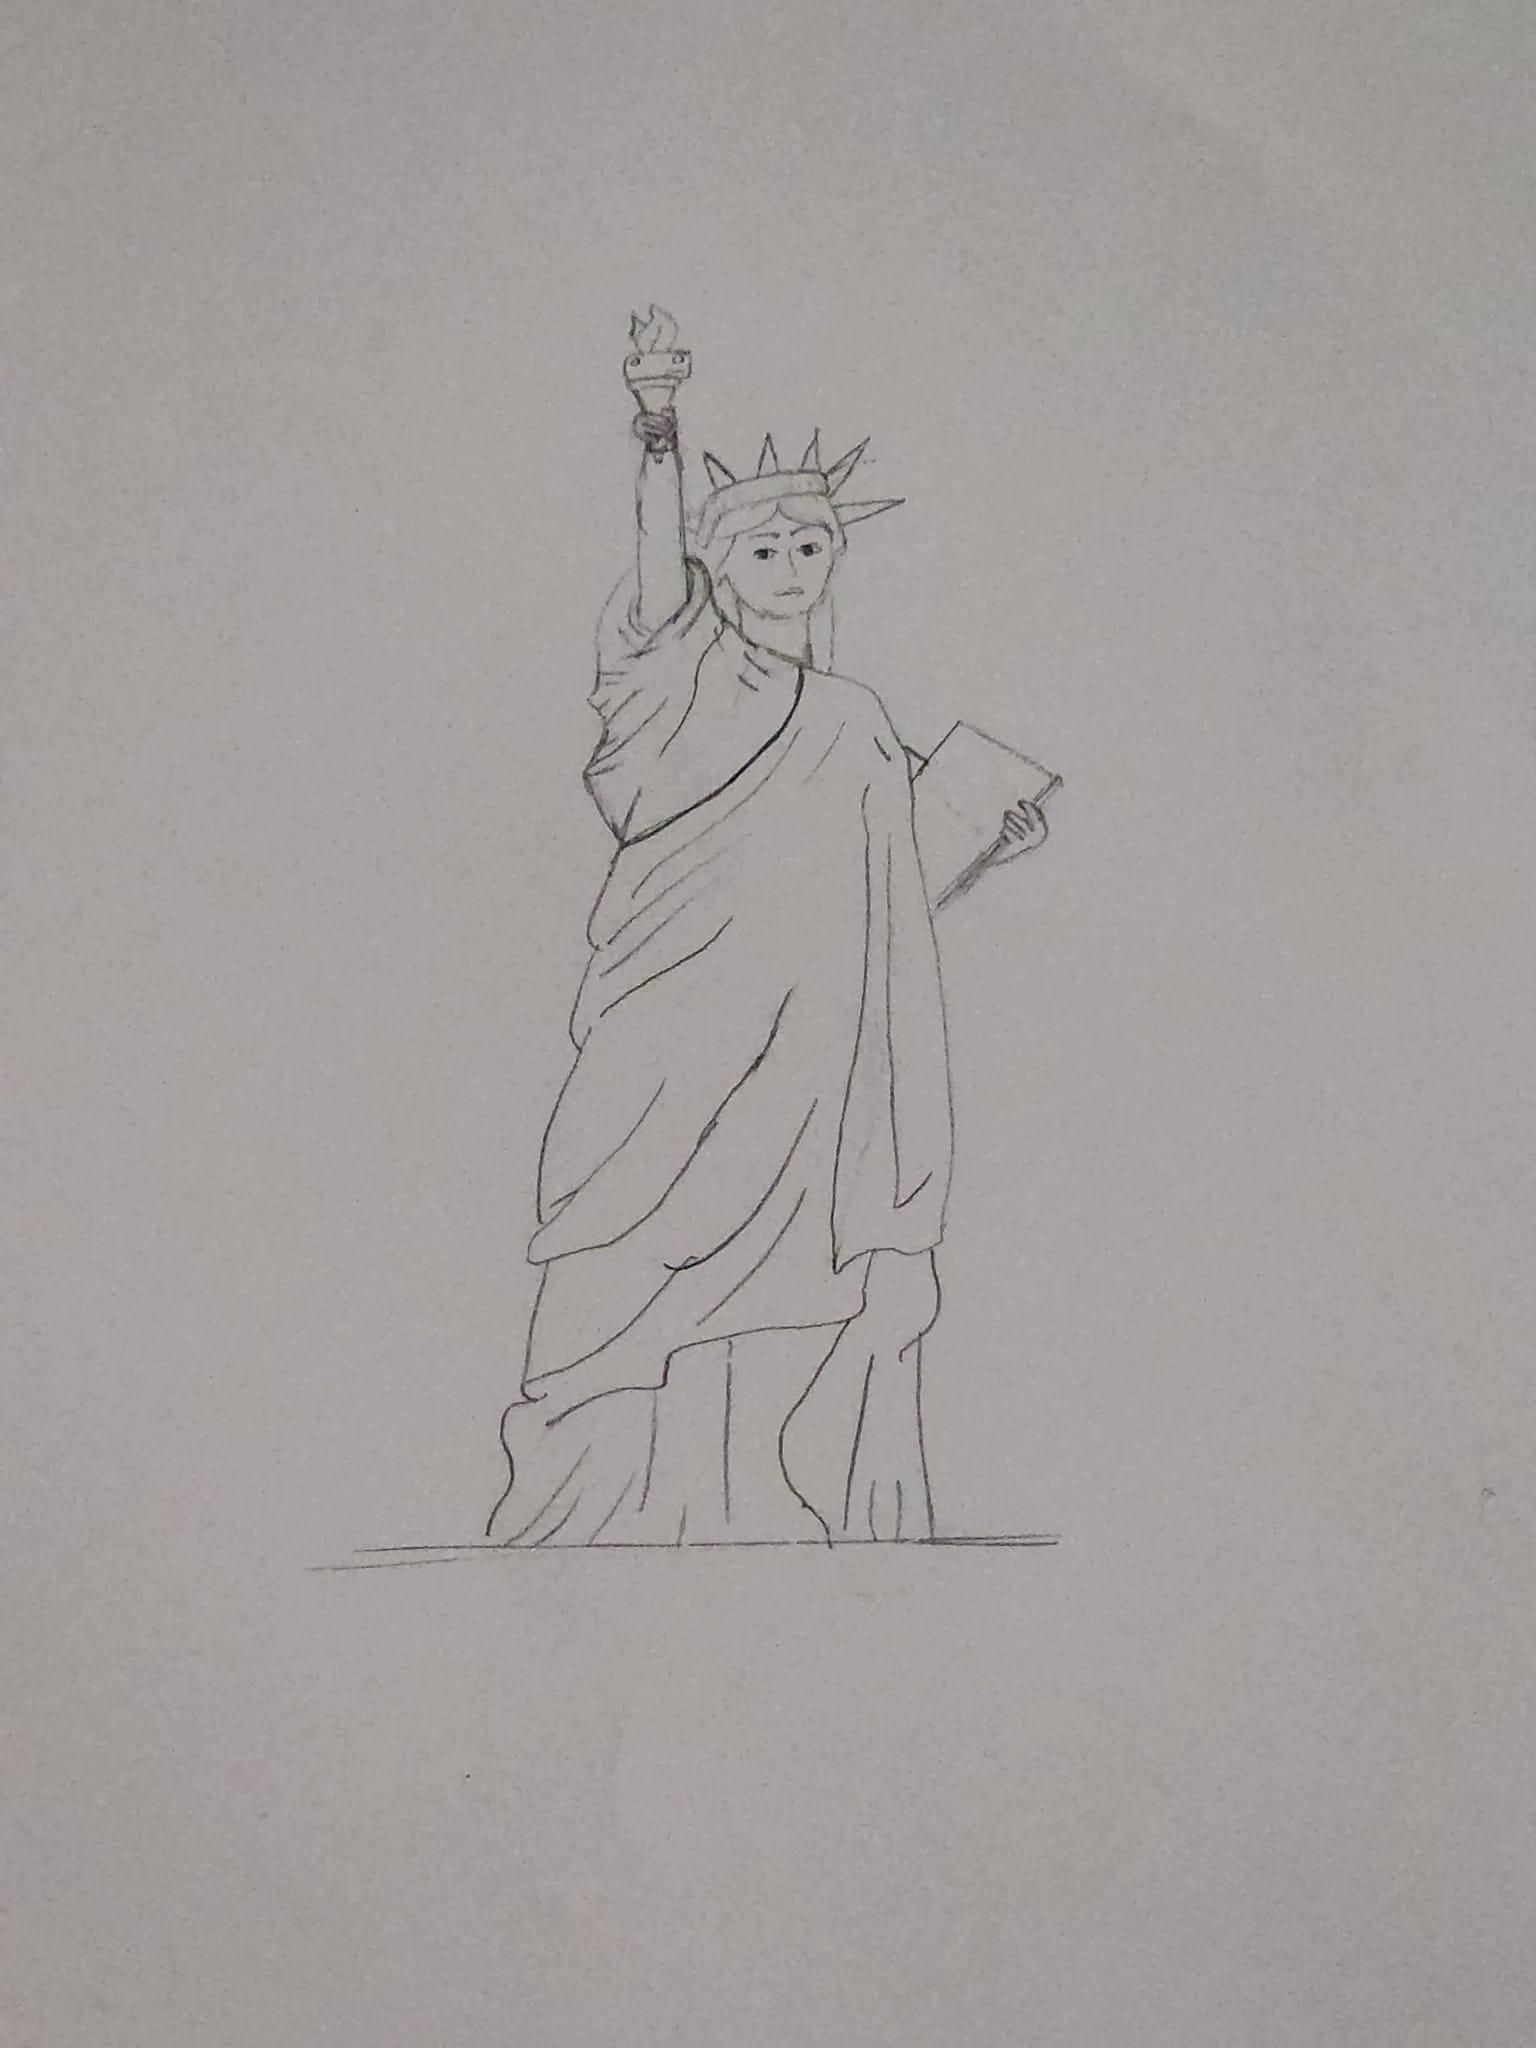 Why the Statue of Liberty is Still Important